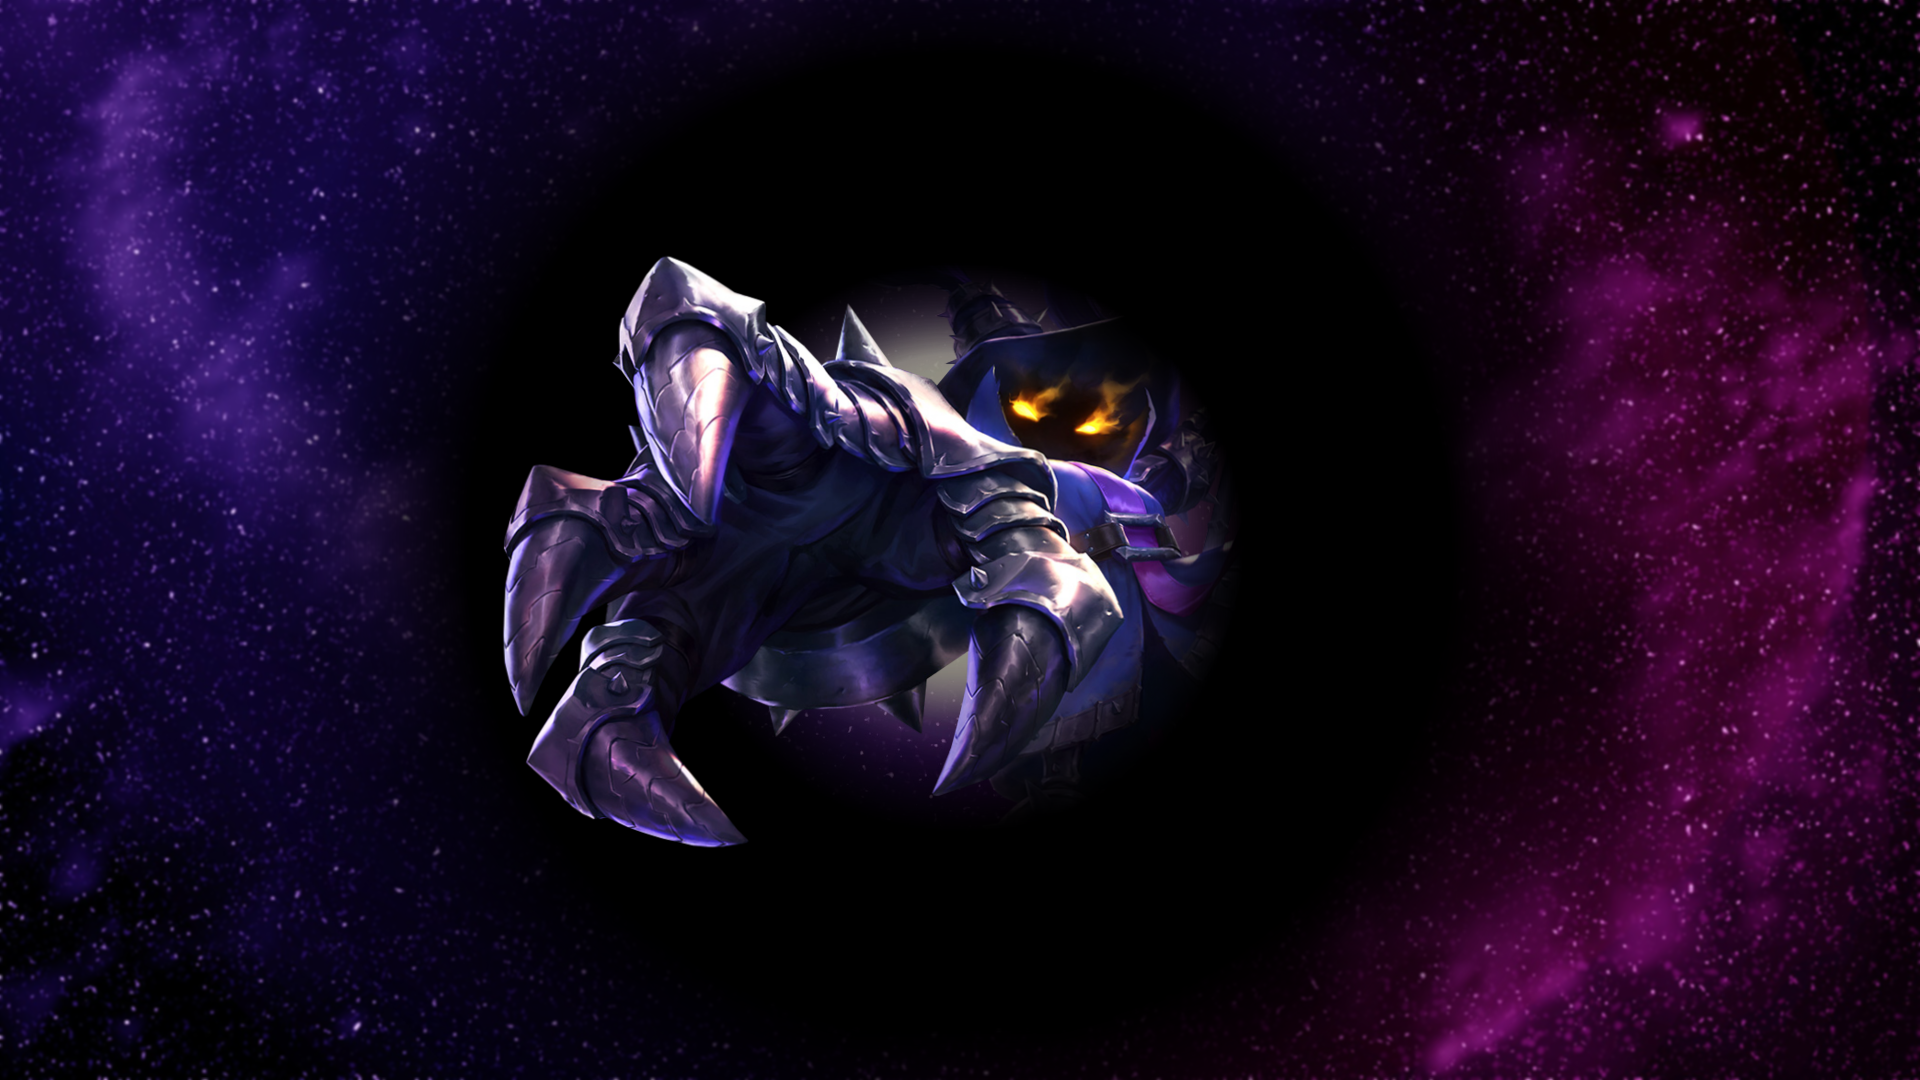 General 1920x1080 League of Legends picture-in-picture Veigar (League of Legends) space black holes stars